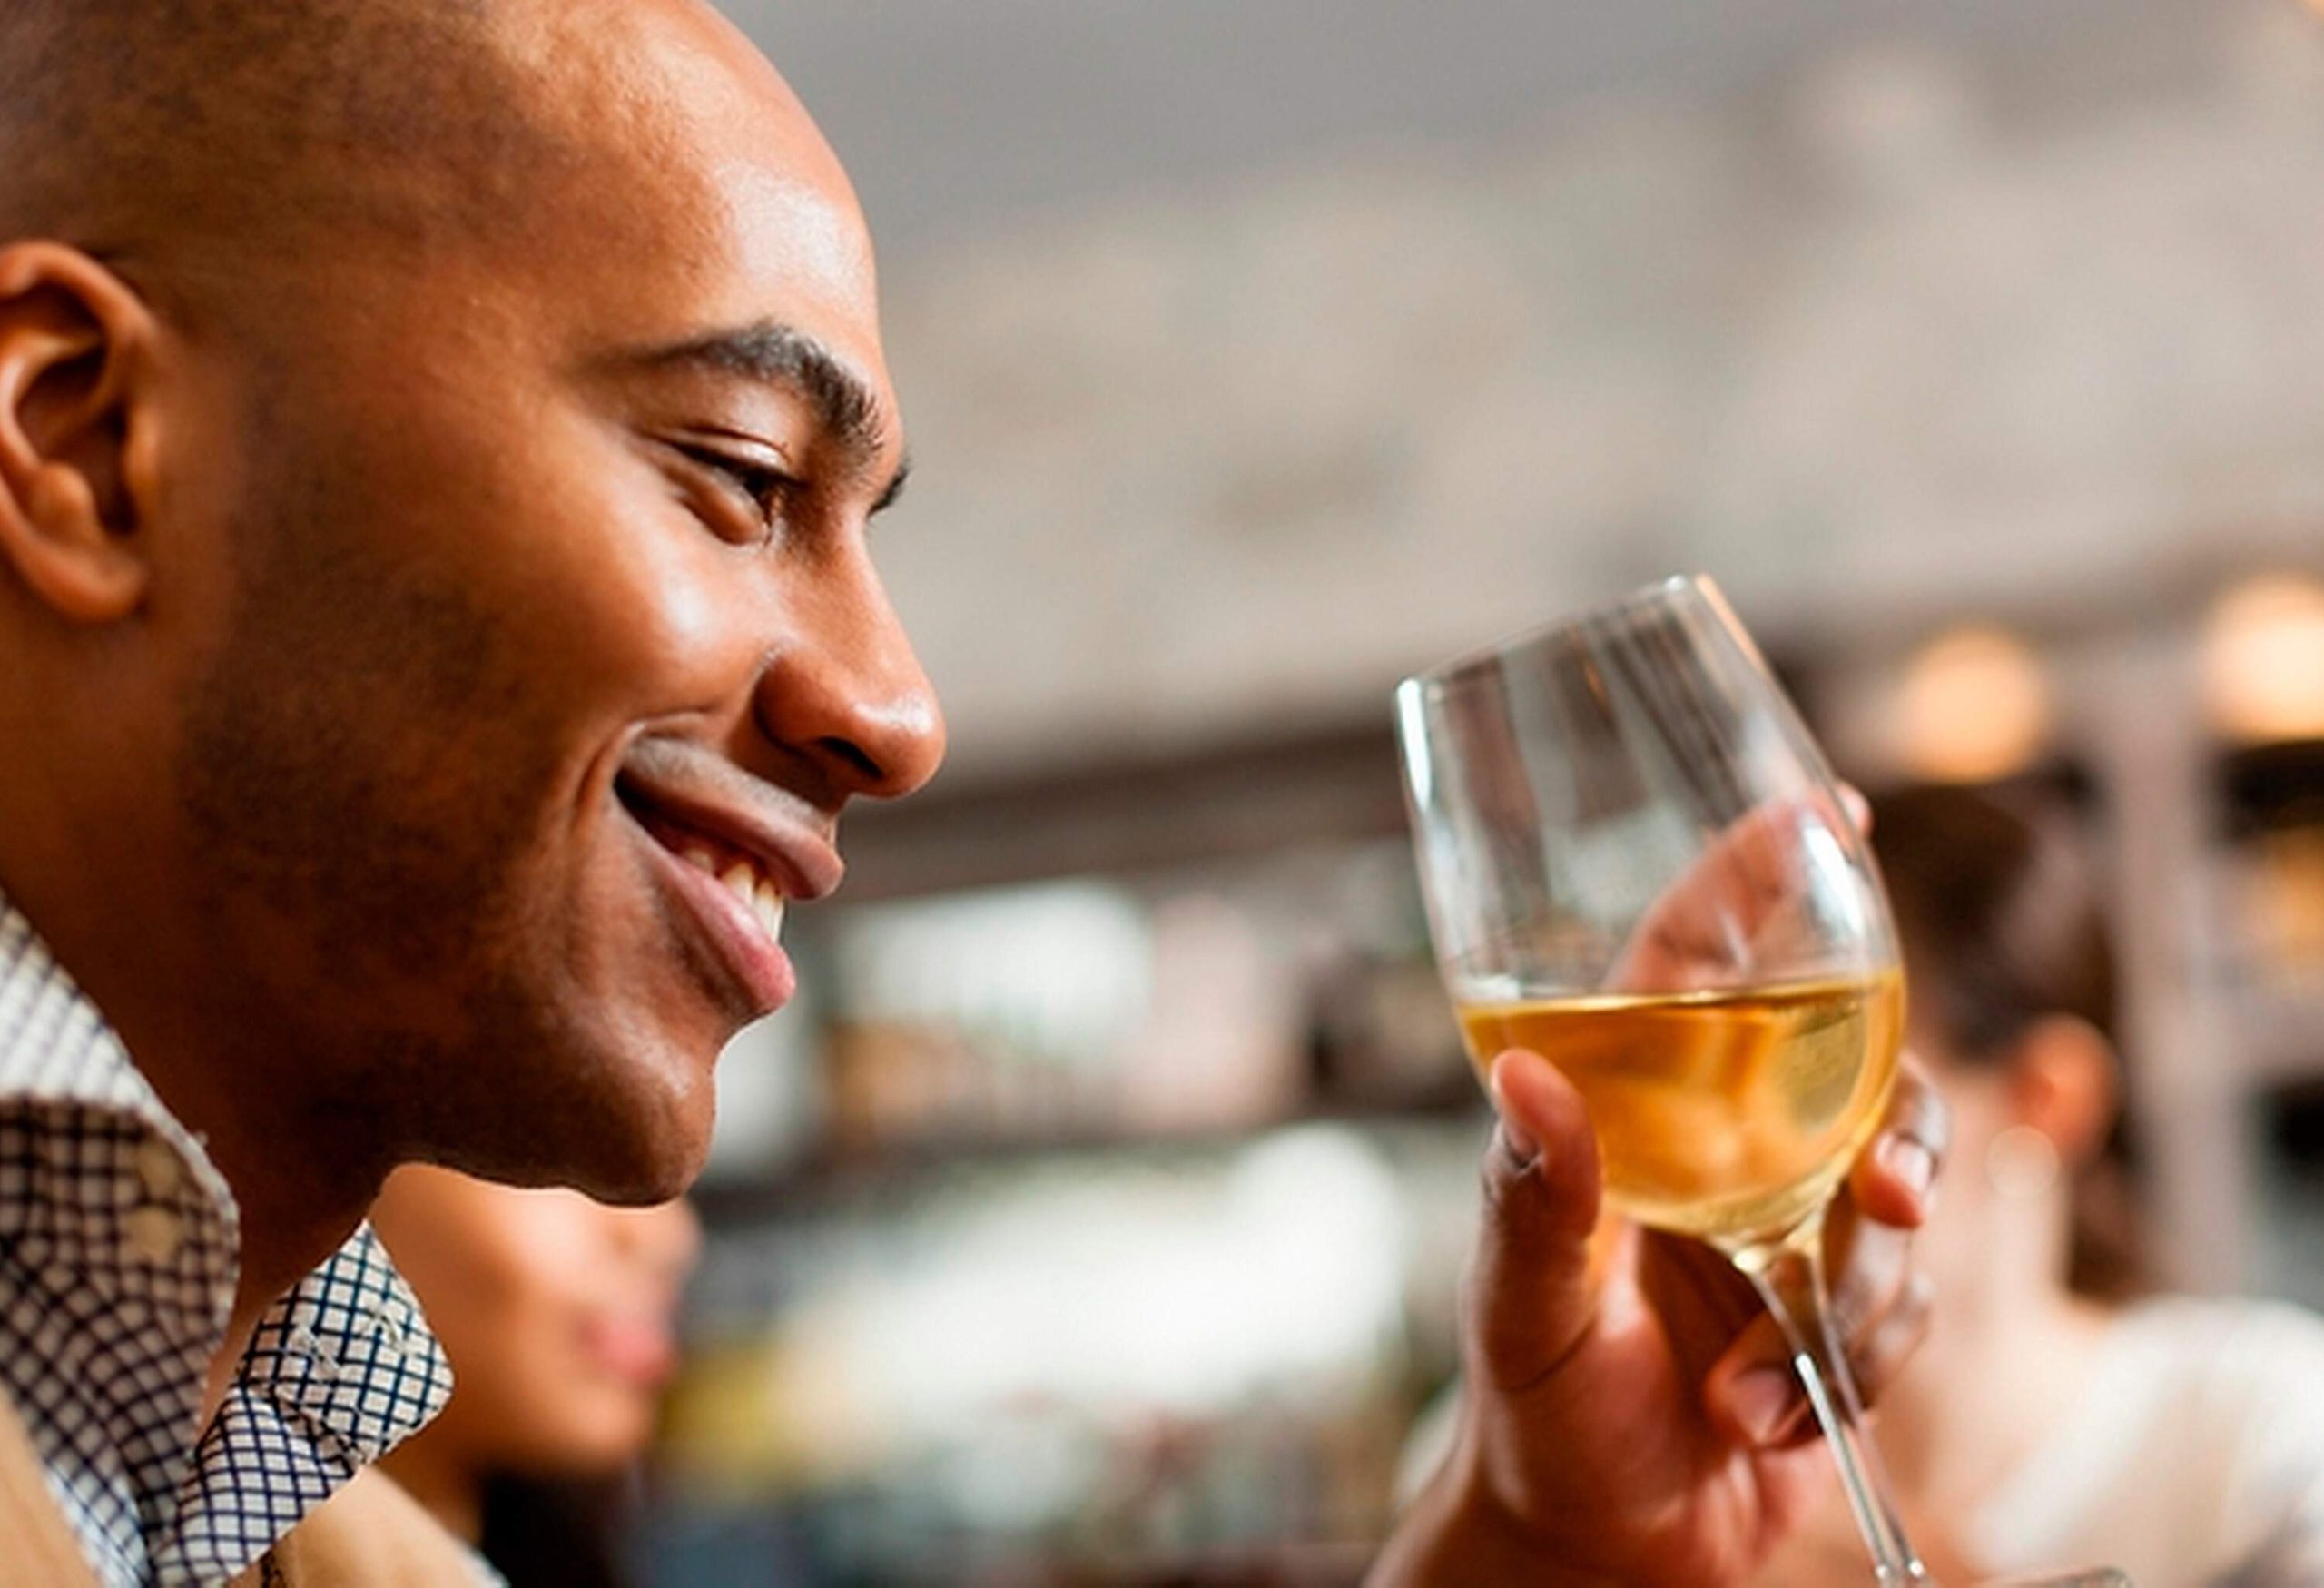  A smiling man holds a glass of white wine.